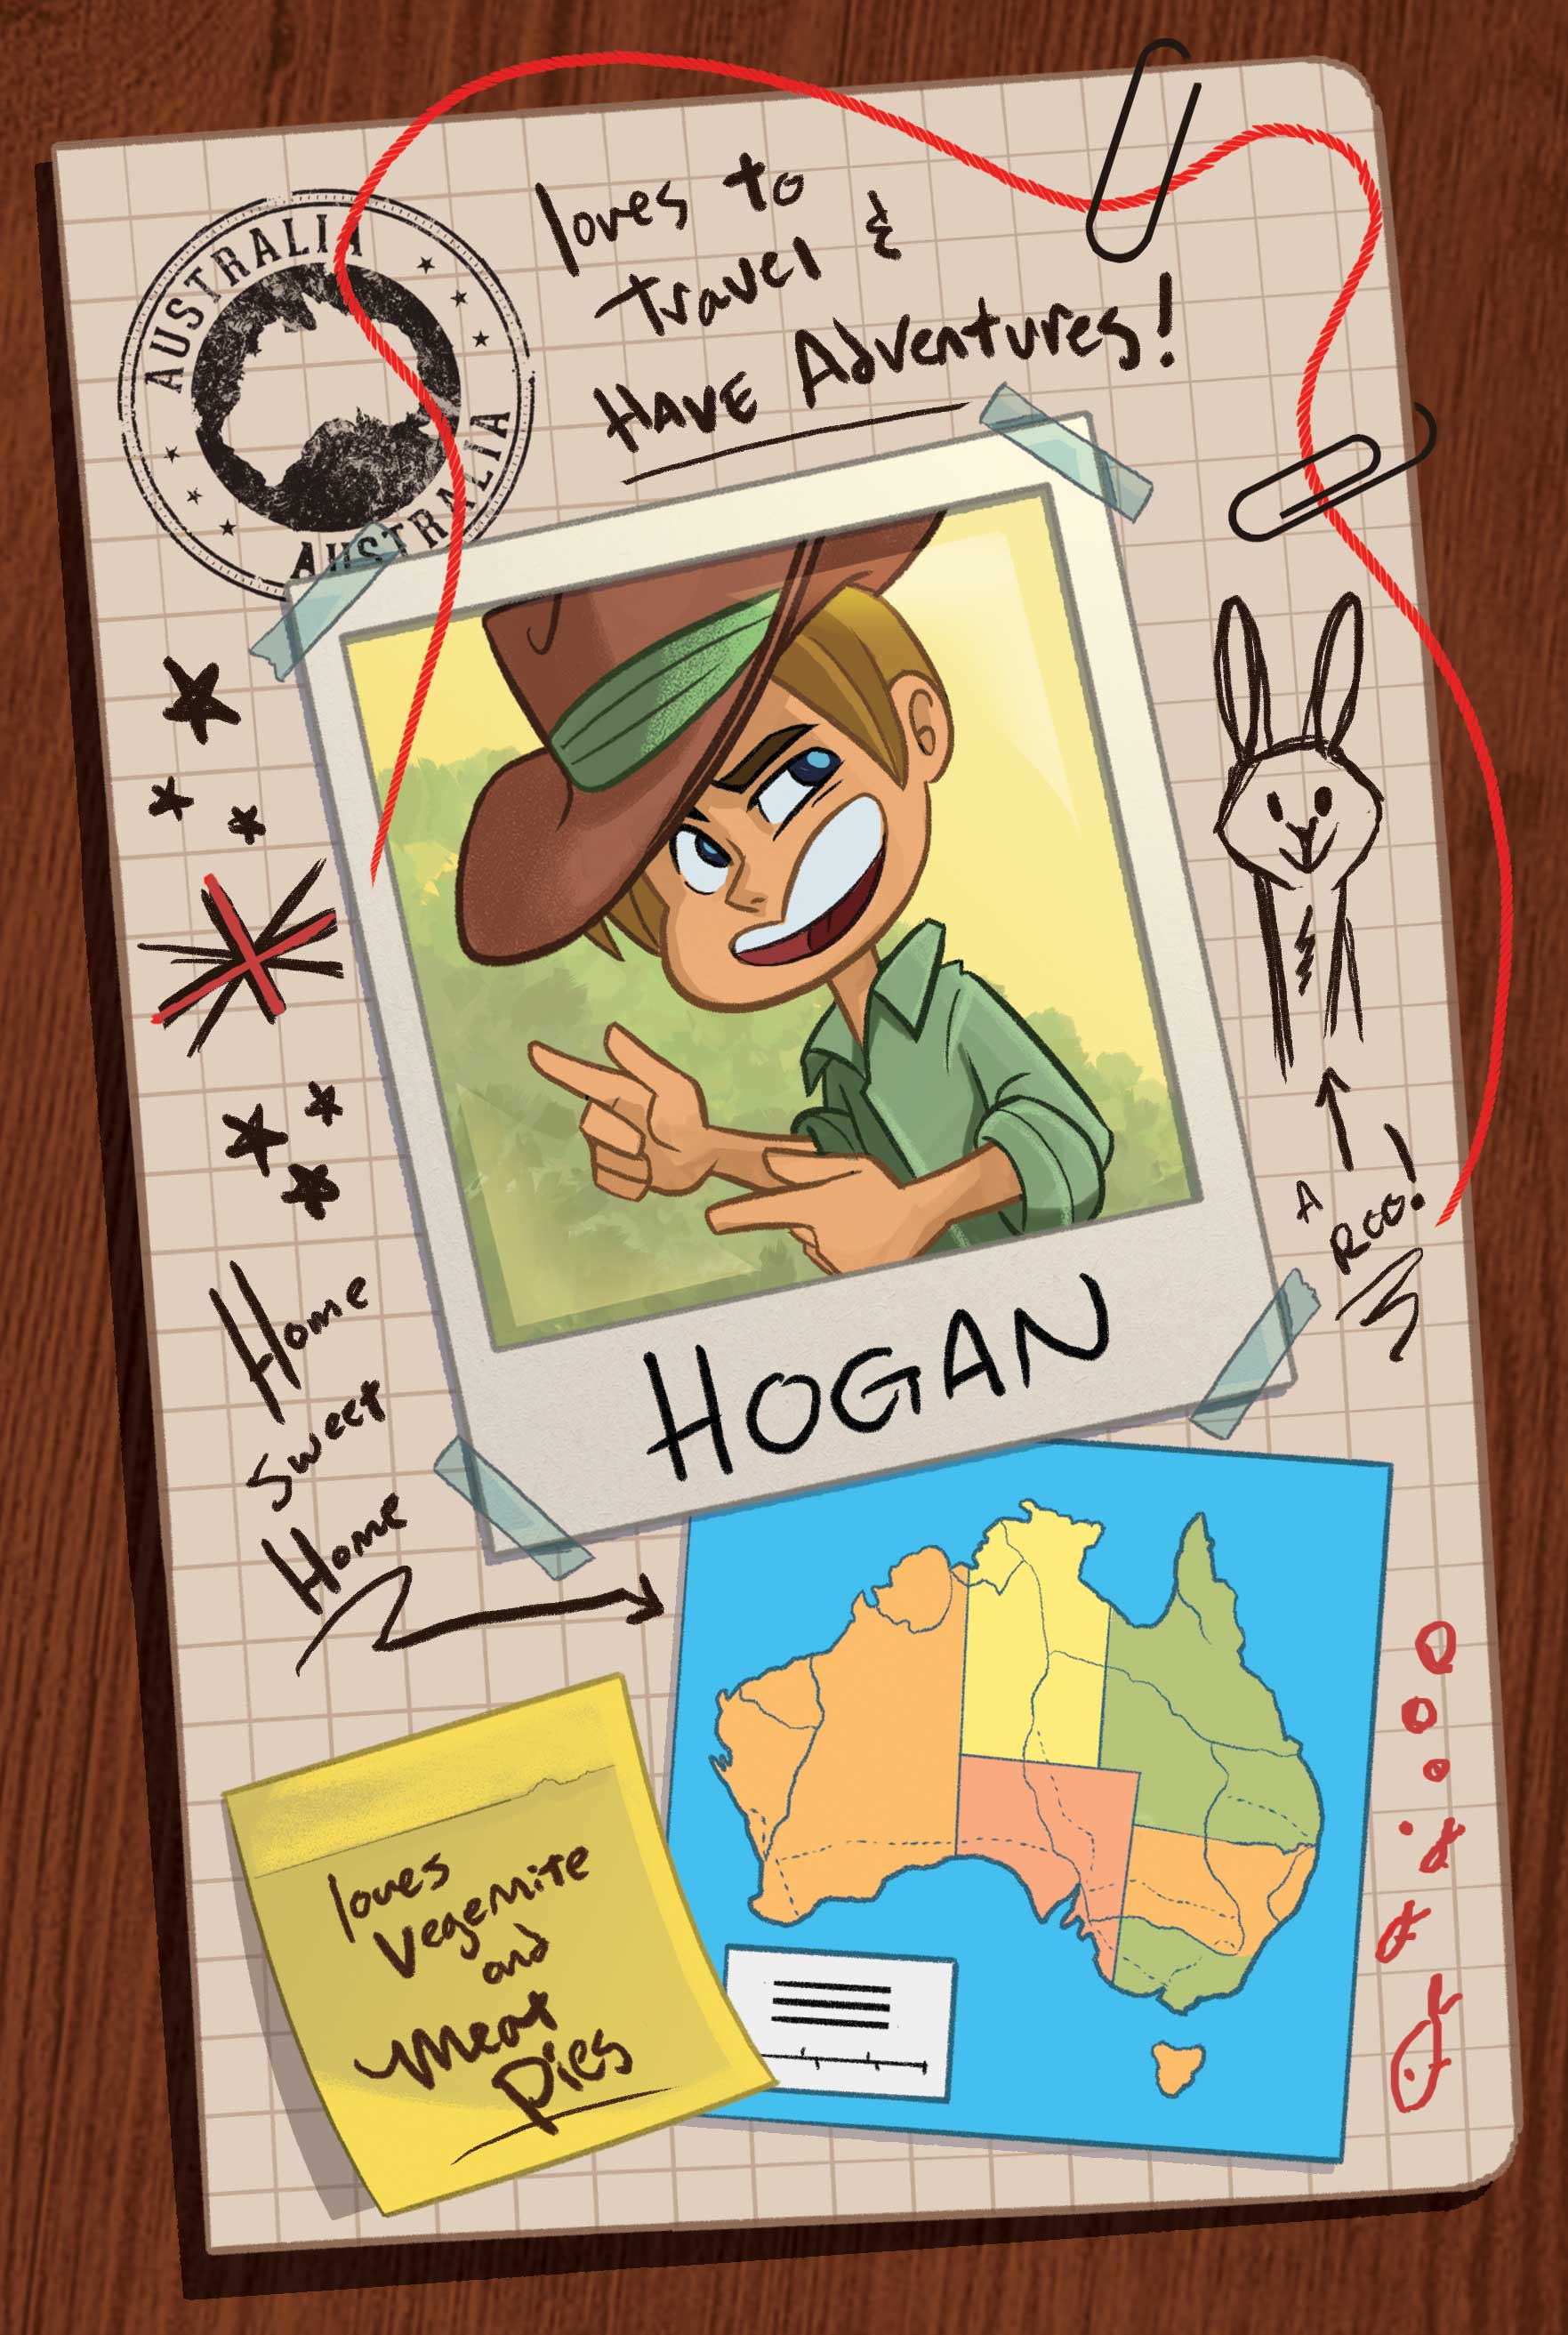 Hogan, Meet the Characters from my magical Life